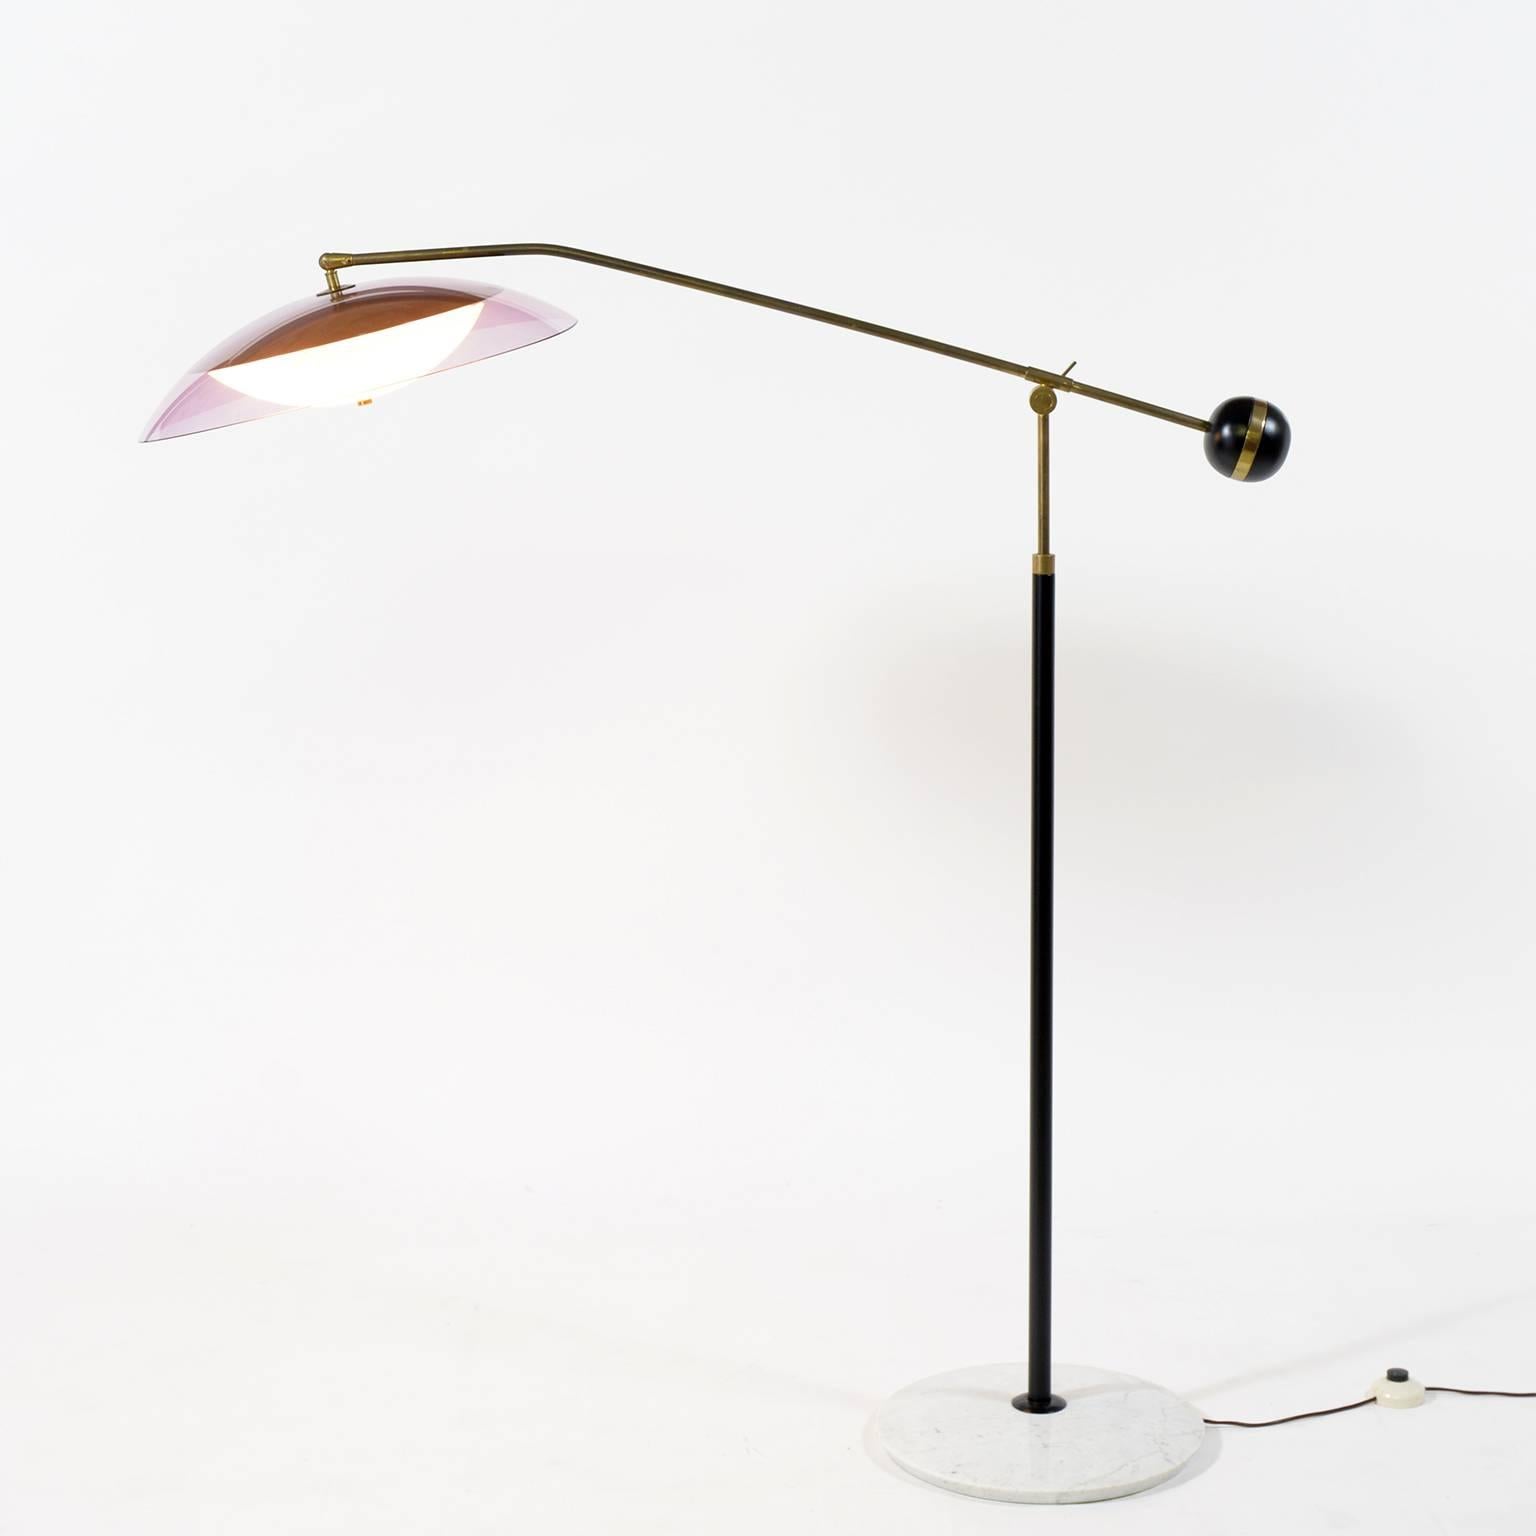 1960s standing lamp in Natural brass and black laquered brass adjustable structure.
The shades of this lamp are in amethyst color and white Lucite and the base in white Carrara marble.
The arm and the shade can be moved.
The arm end with brass